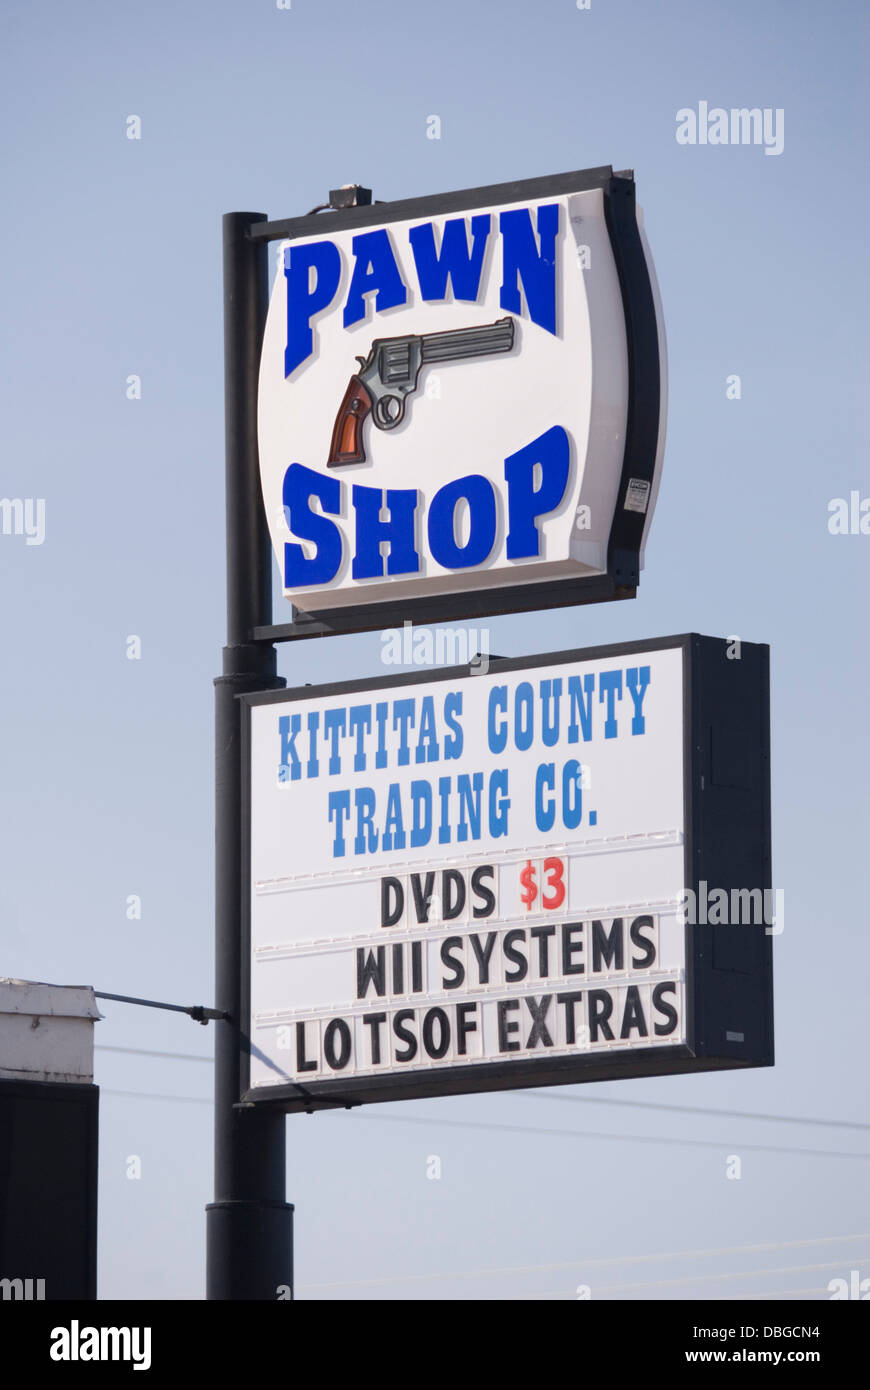 Pawn Shop sign with picture of a gun, advertising cheap Wii systems & DVDs, Ellensburg Trading Co, Ellensburg, Washington, USA Stock Photo